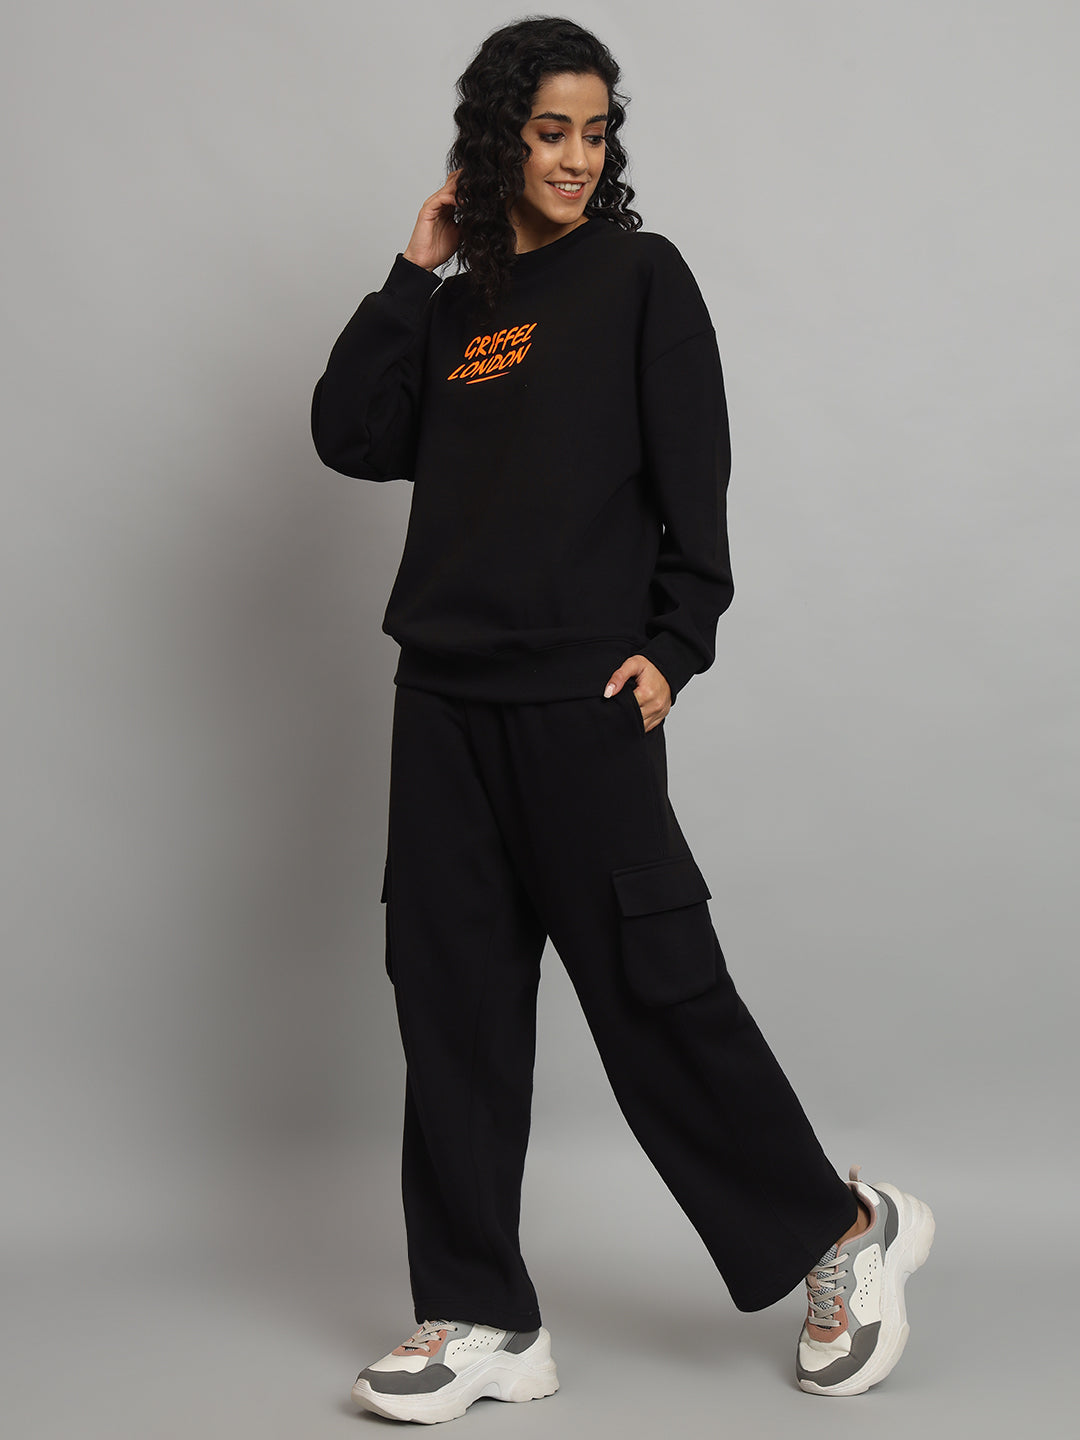 Griffel Women Oversized WHO ARE YOU TO JUDGE Print Fit Basic Round Neck 100% Cotton Fleece Black Tracksuit - griffel